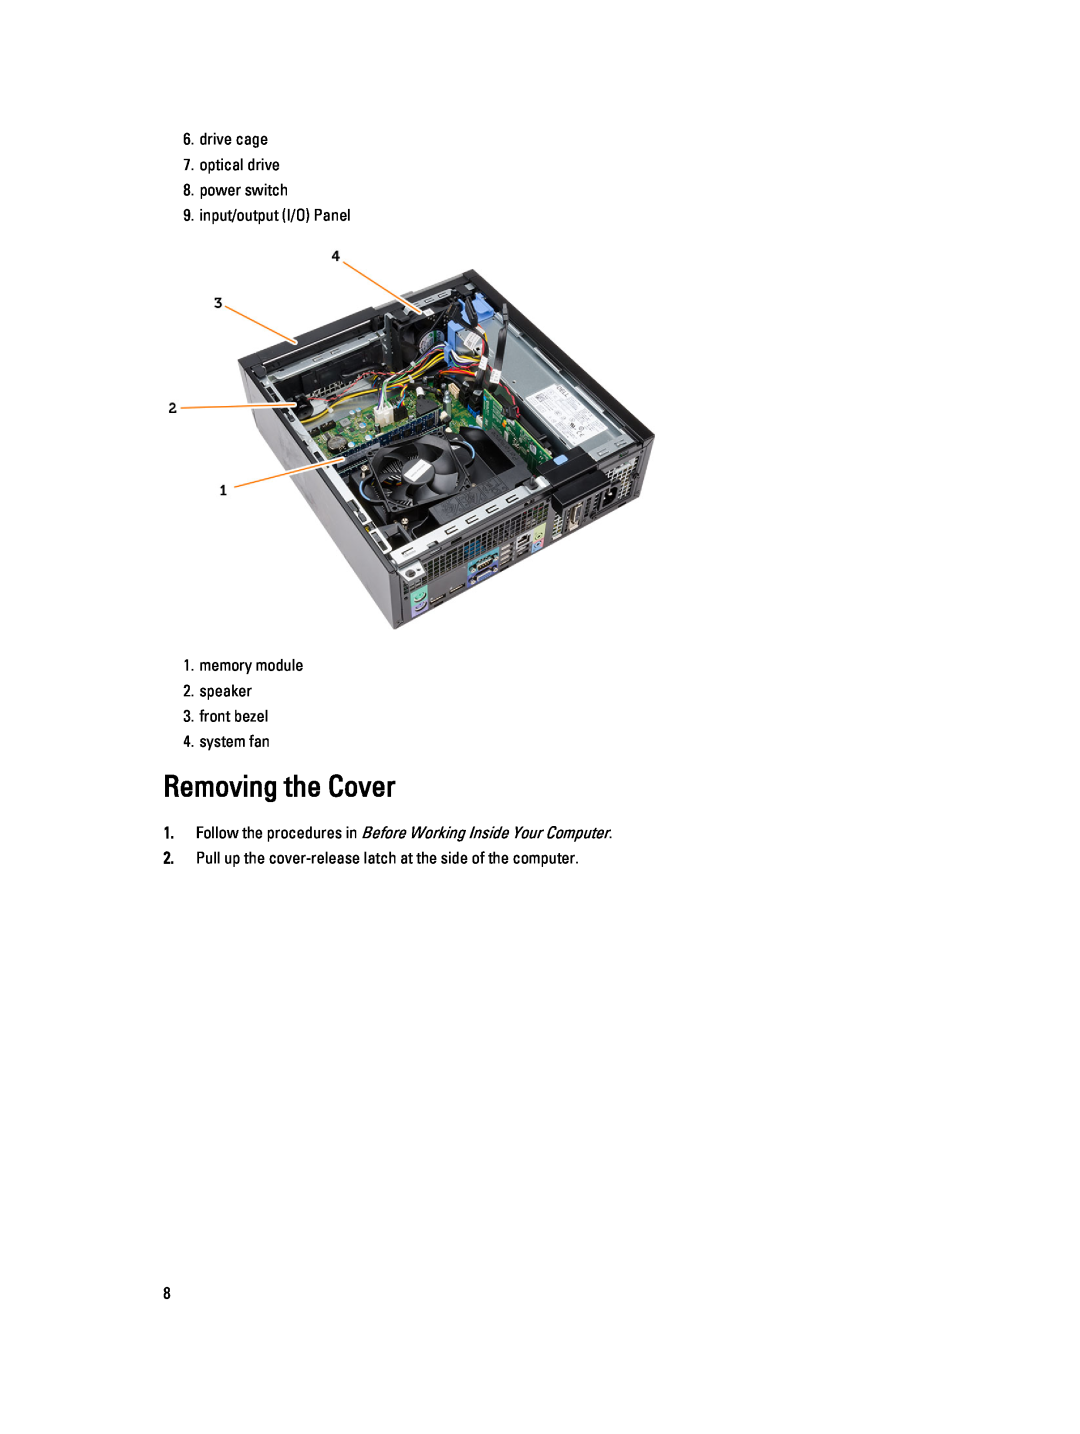 Dell T1700 owner manual Removing the Cover, Follow the procedures in Before Working Inside Your Computer, system fan 